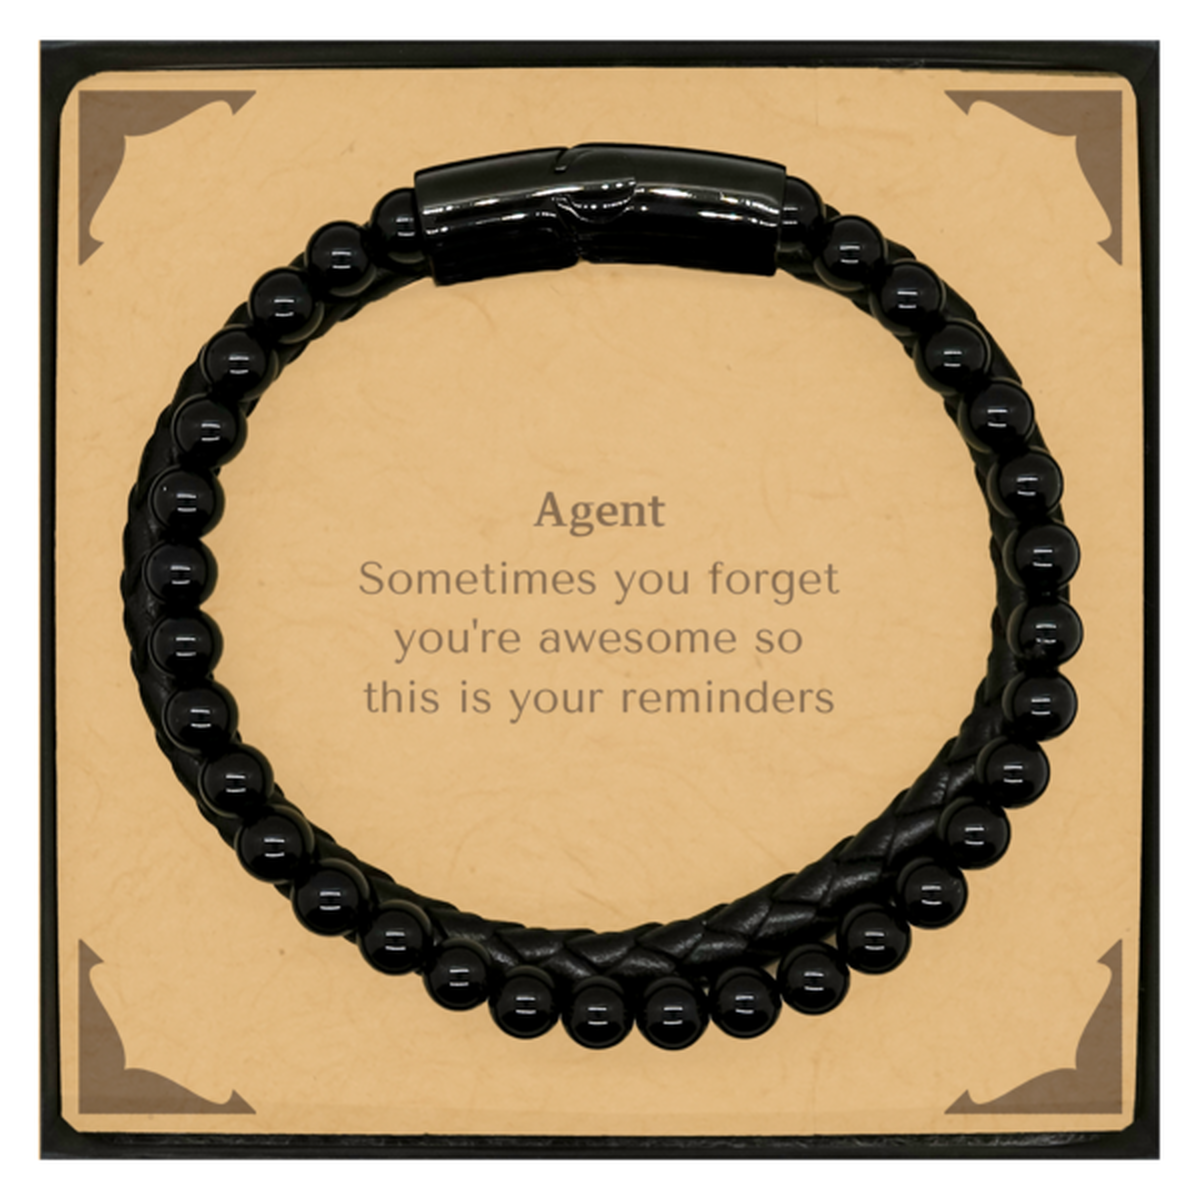 Sentimental Agent Stone Leather Bracelets, Agent Sometimes you forget you're awesome so this is your reminders, Graduation Christmas Birthday Gifts for Agent, Men, Women, Coworkers